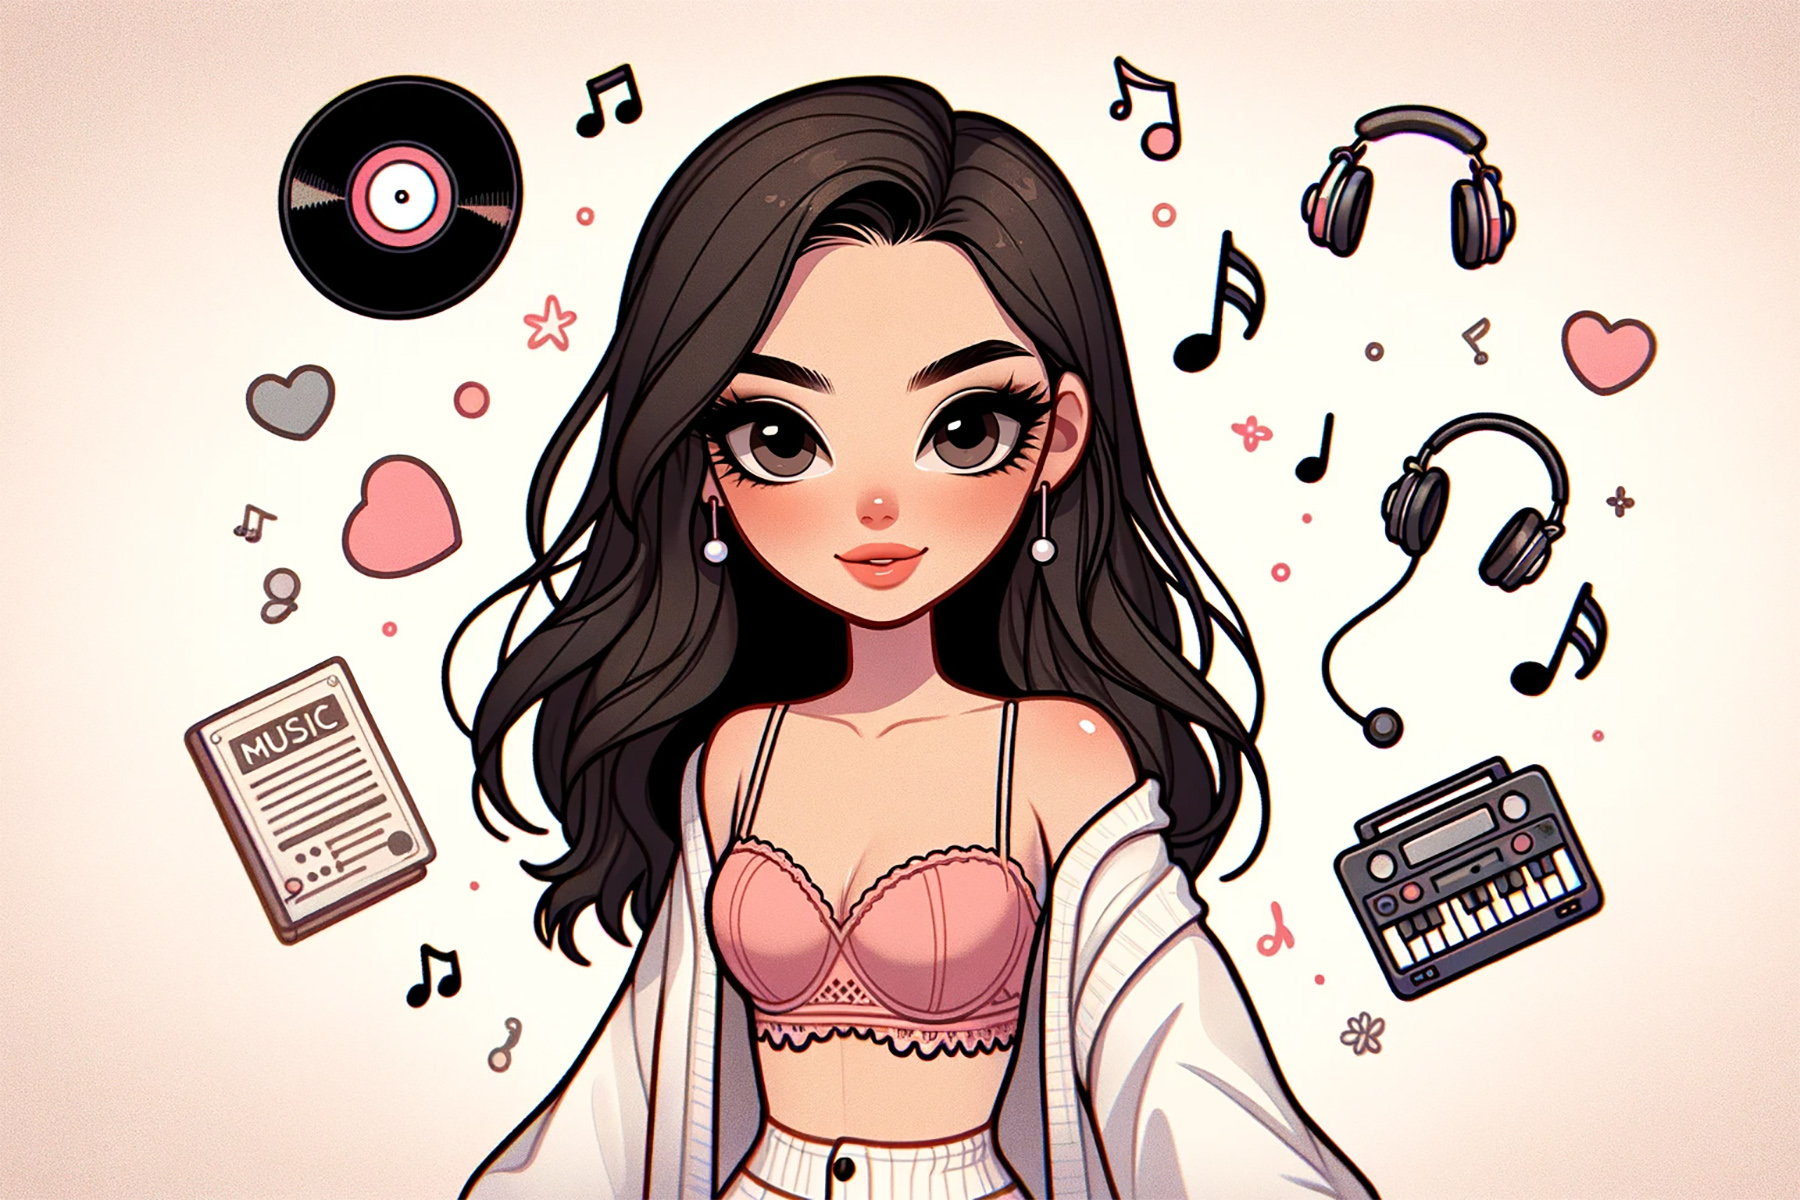 cartoonish lana del rey with long dark hair, fair skin, and striking features, surrounded by musical elements